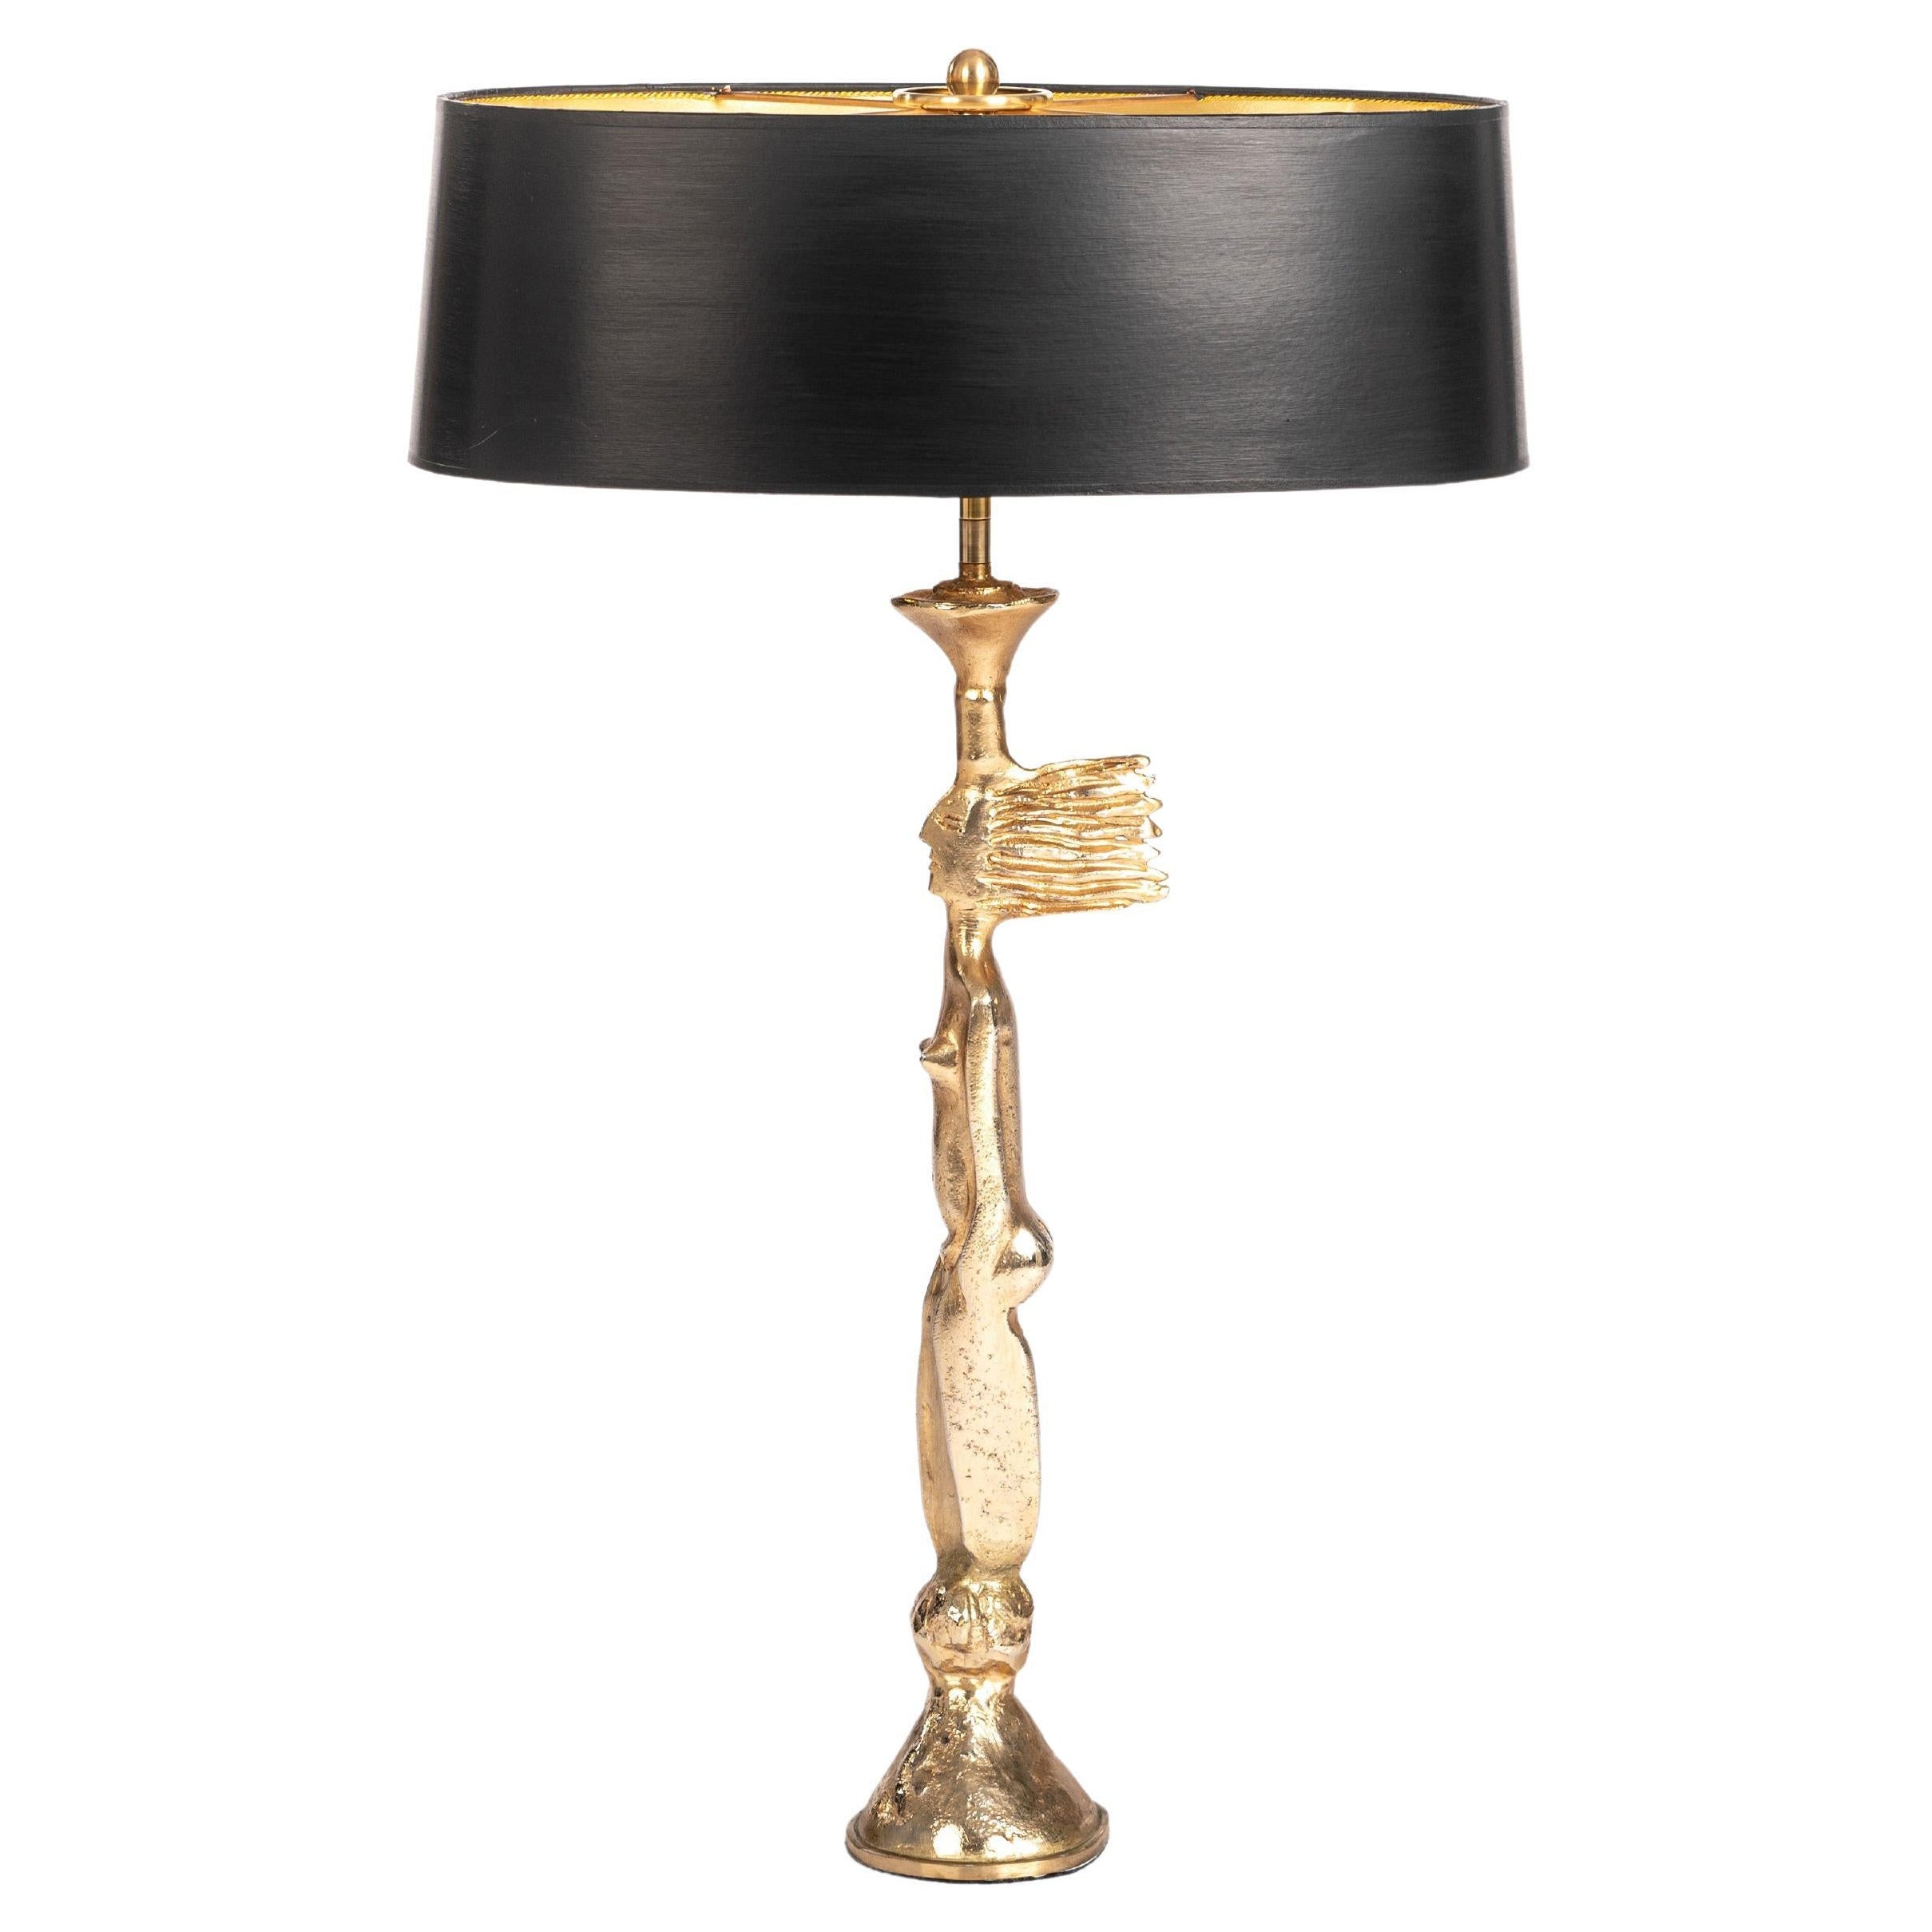 French Gilded Bronze Table Lamp by Pierre Casenove for Fondica, 1980s